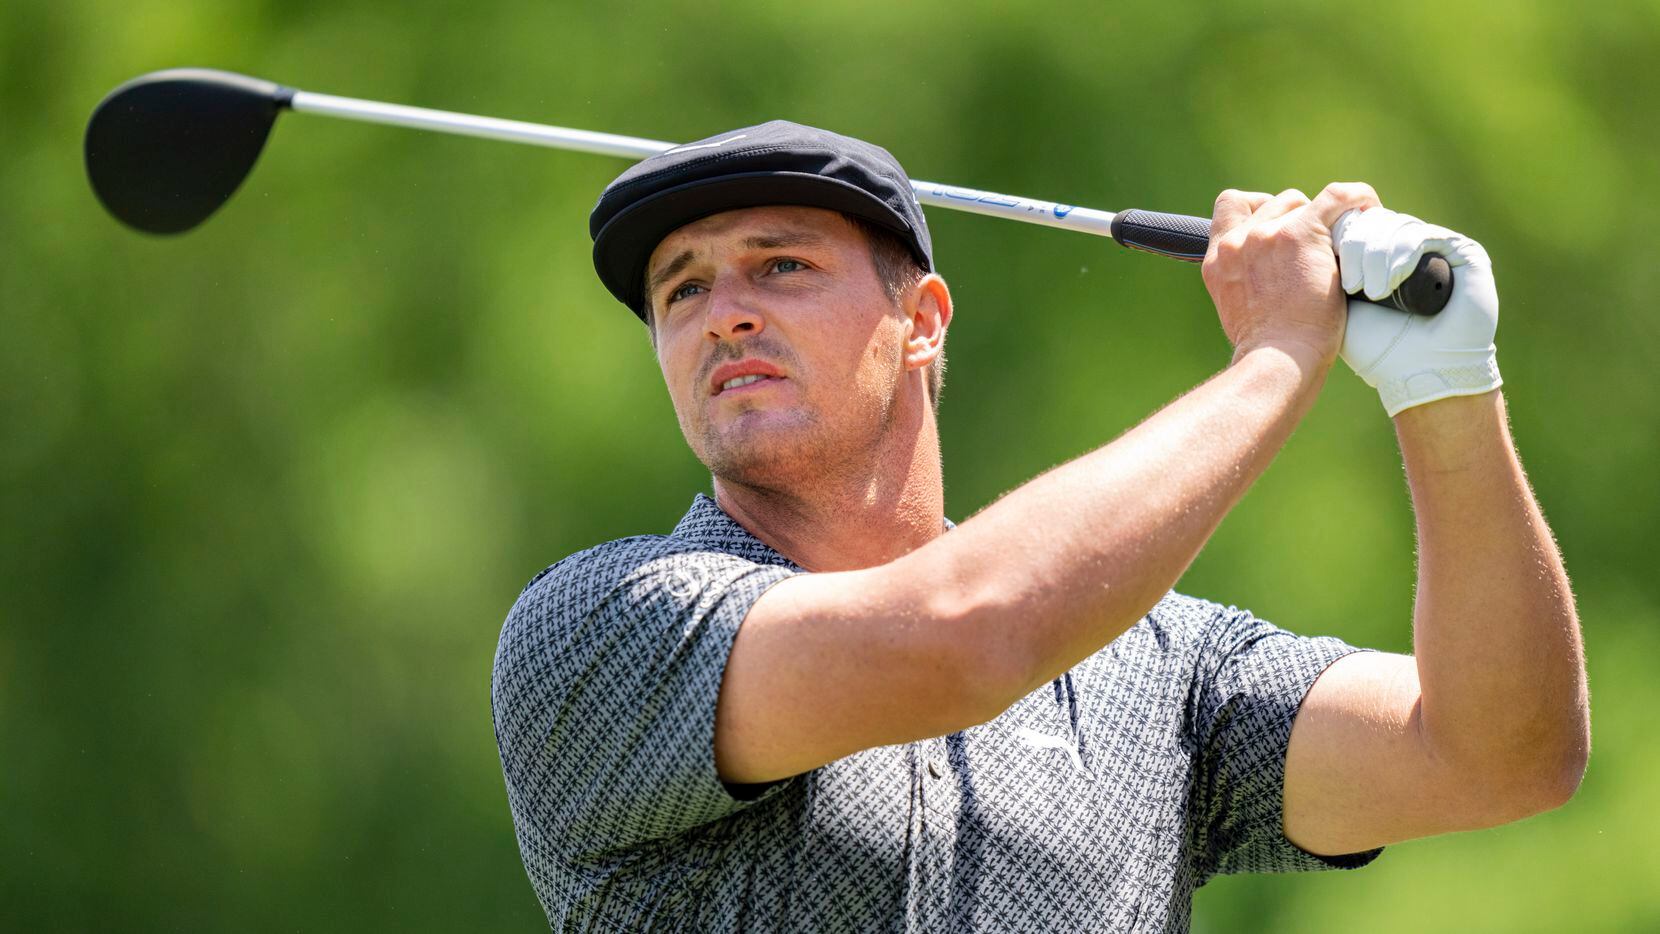 Bryson DeChambeau watches his tee shot on the third hole during the first round of the Wells Fargo Championship golf tournament at Quail Hollow Club on Thursday, May 6, 2021, in Charlotte, N.C.